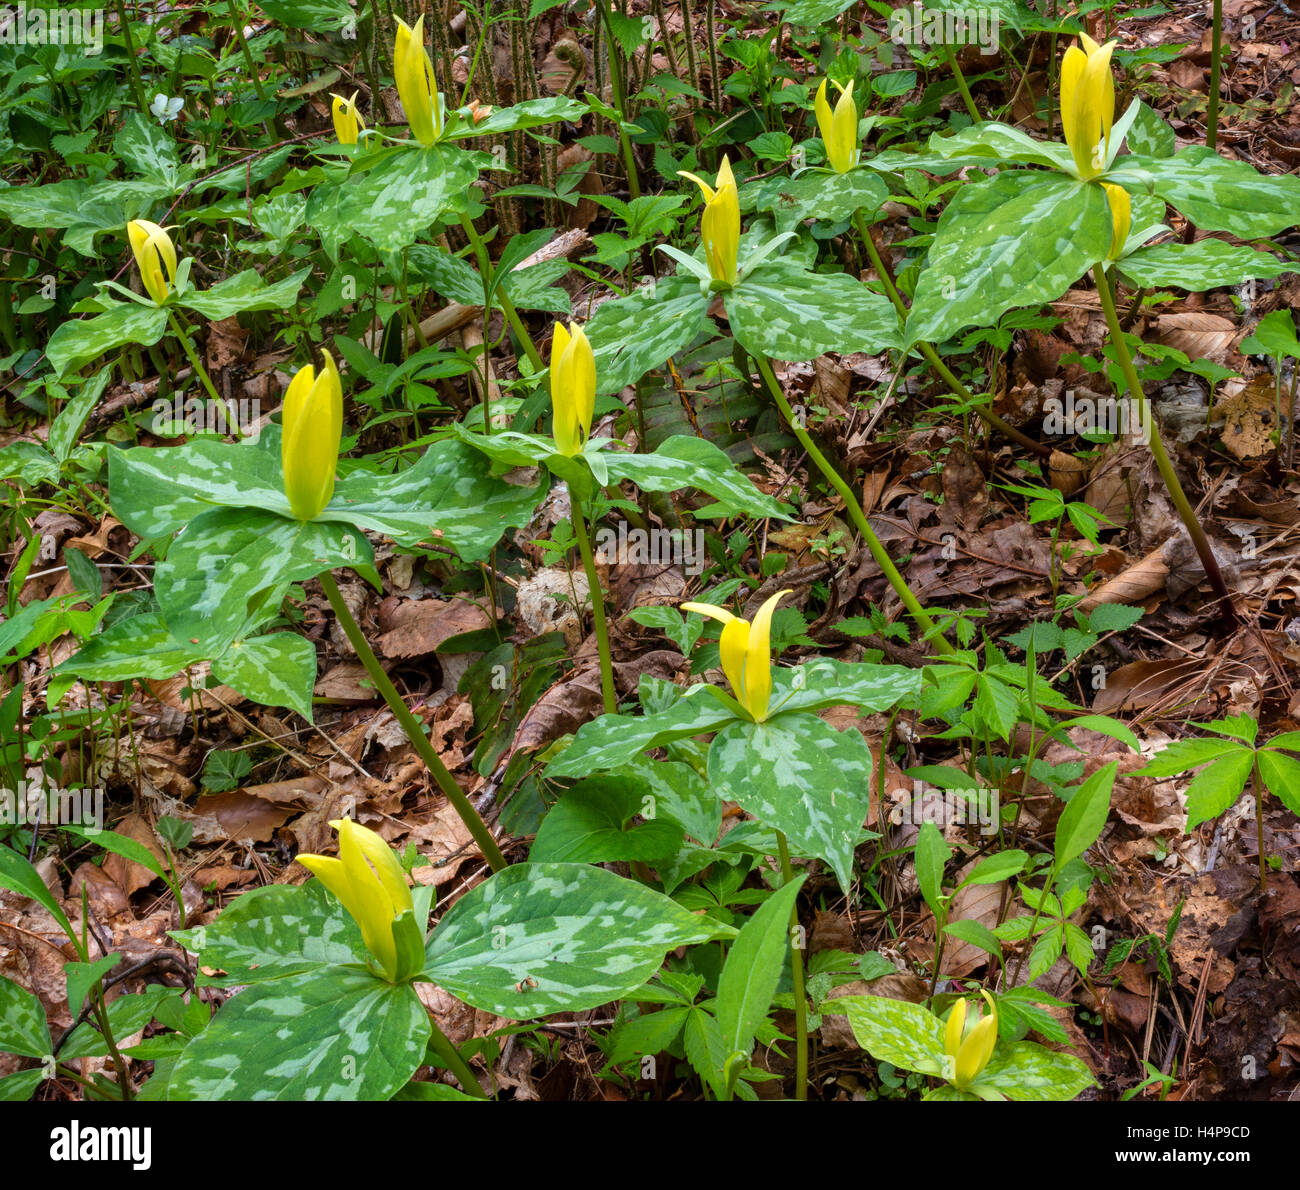 Great Smoky Mountains National Park, Tennessee: Yellow trillium (Trillium luteum) blooming in forest understory Stock Photo